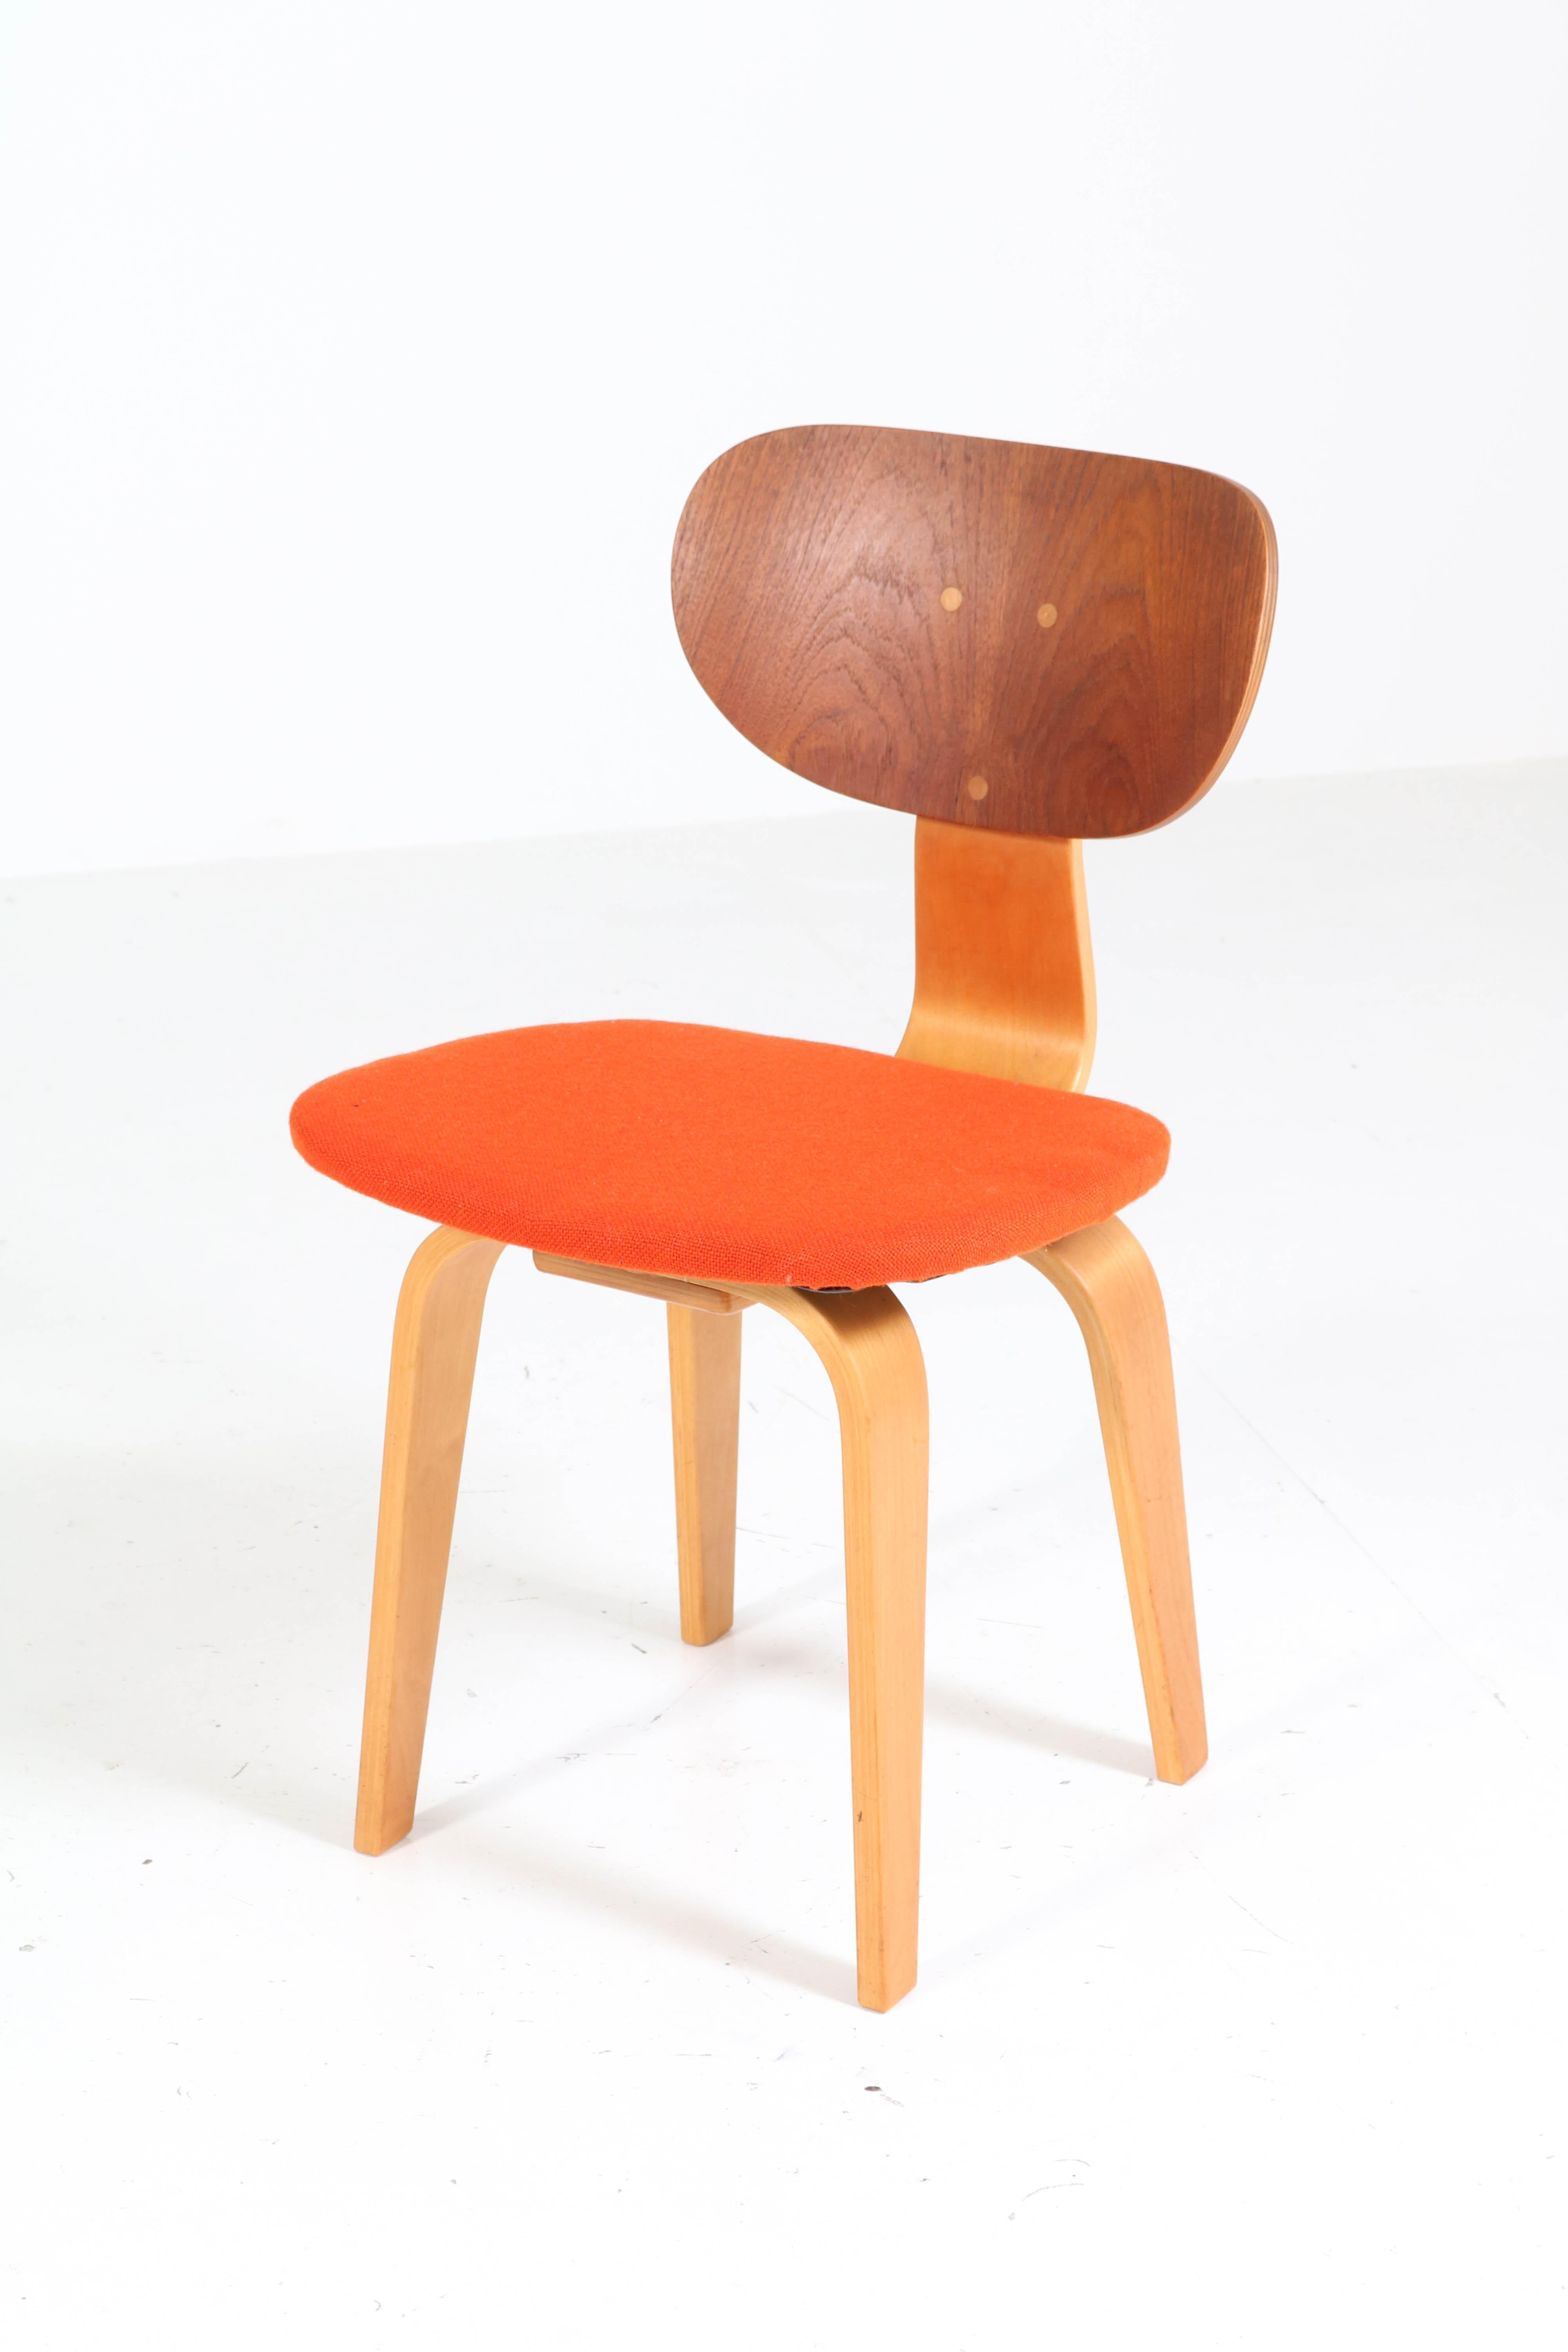 Wonderful and rare Mid-Century Modern chair.
Design by Cees Braakman for Pastoe.
Combex SB02.
Striking Dutch design from the 1950s.
Birch and teak plywood frame with re-upholstered seat.
In very good condition with minor wear consistent with